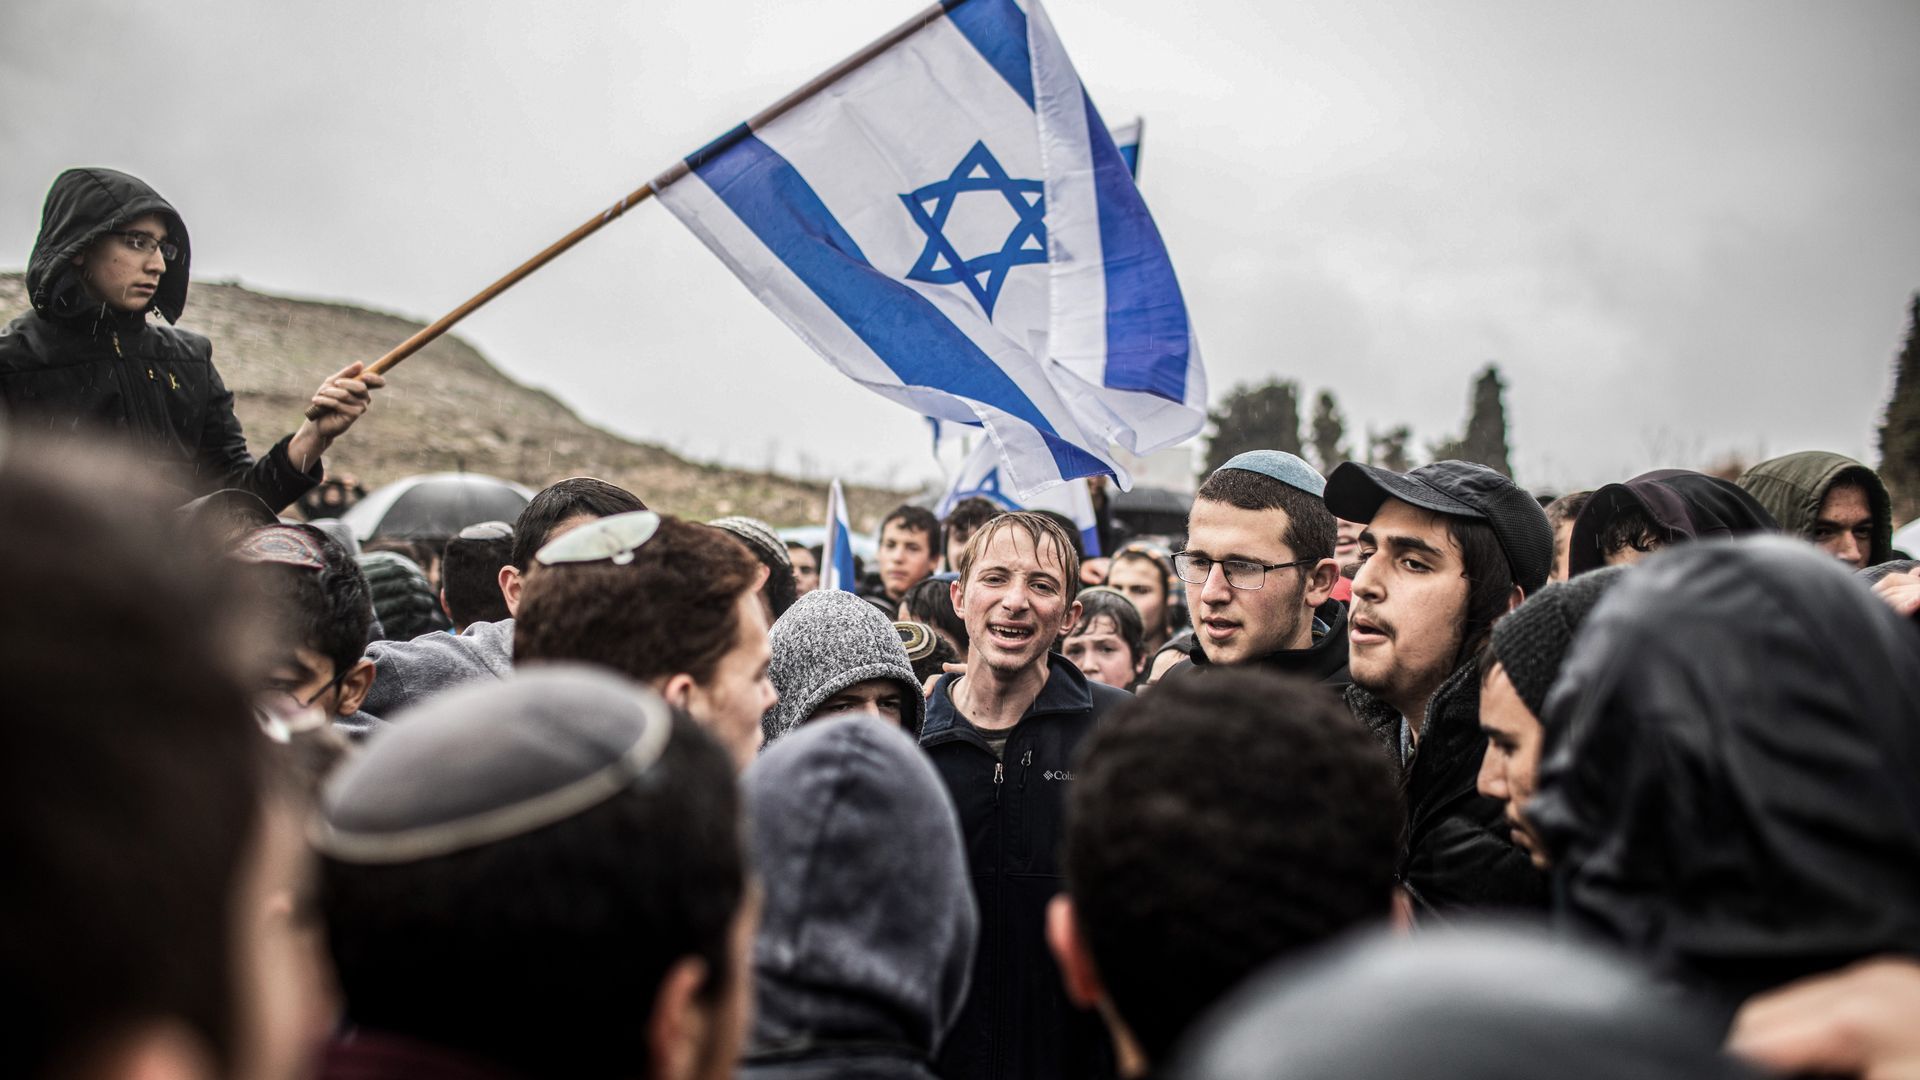 Israeli right-wing activists and settlers take part in a protest march at the West Bank outpost of Homesh in Dec. 2021. Photo: Ilia Yefimovich/picture alliance via Getty Images